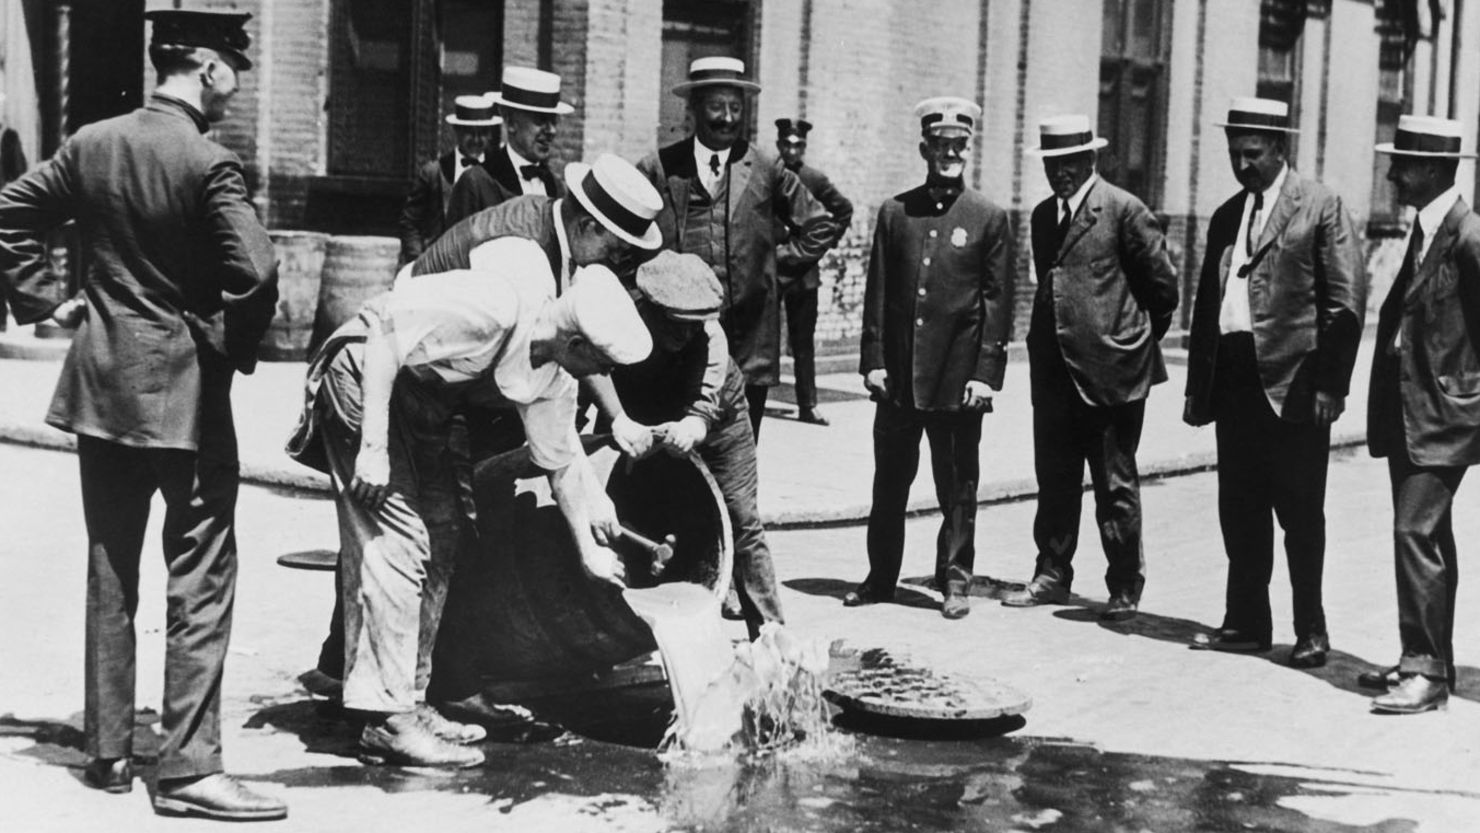 Alcohol is poured away into a New York sewer during the prohibition era, circa 1920. 